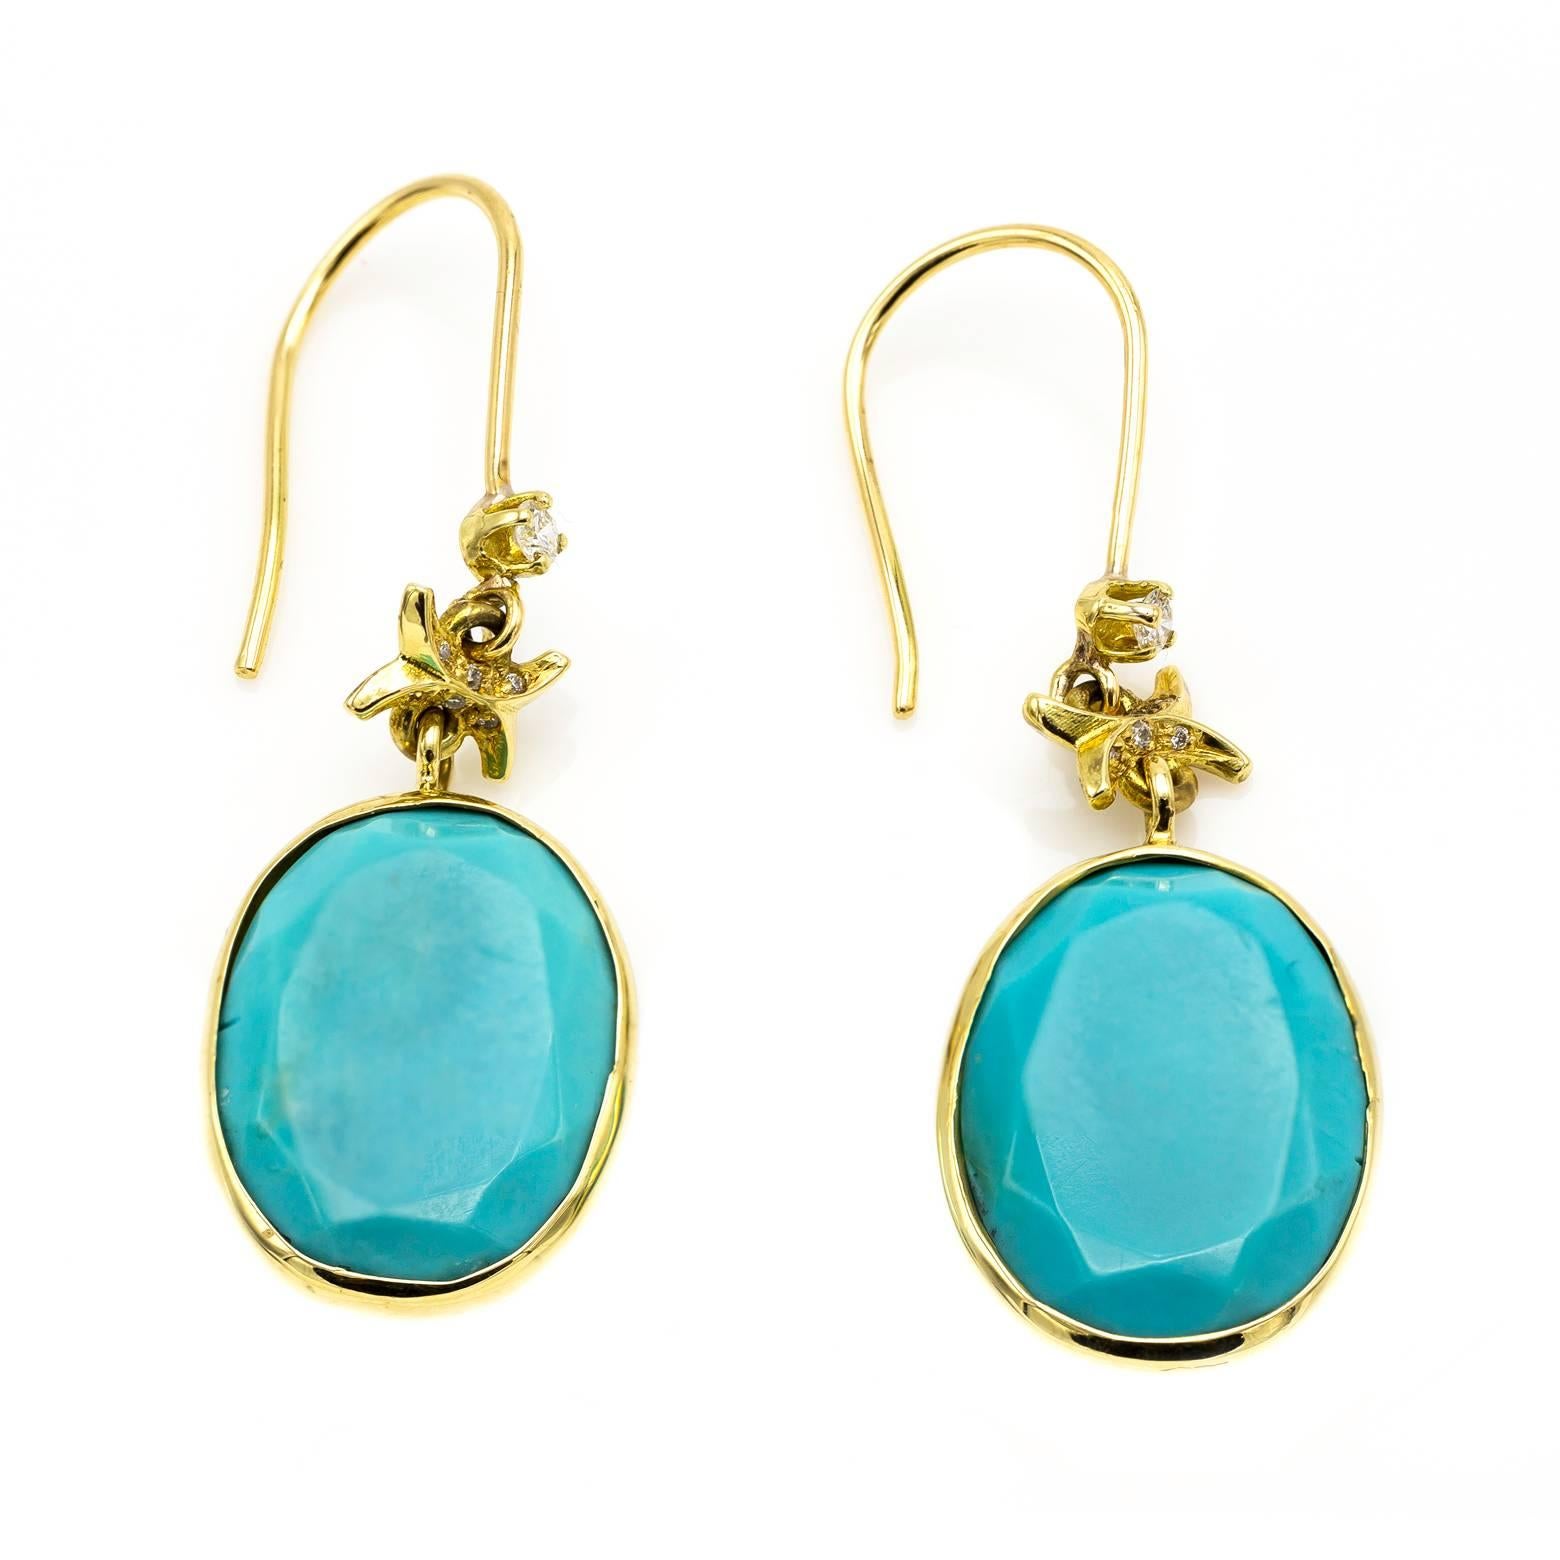 Modern Turquoise and Gold Earrings with Embellished Diamond Accents